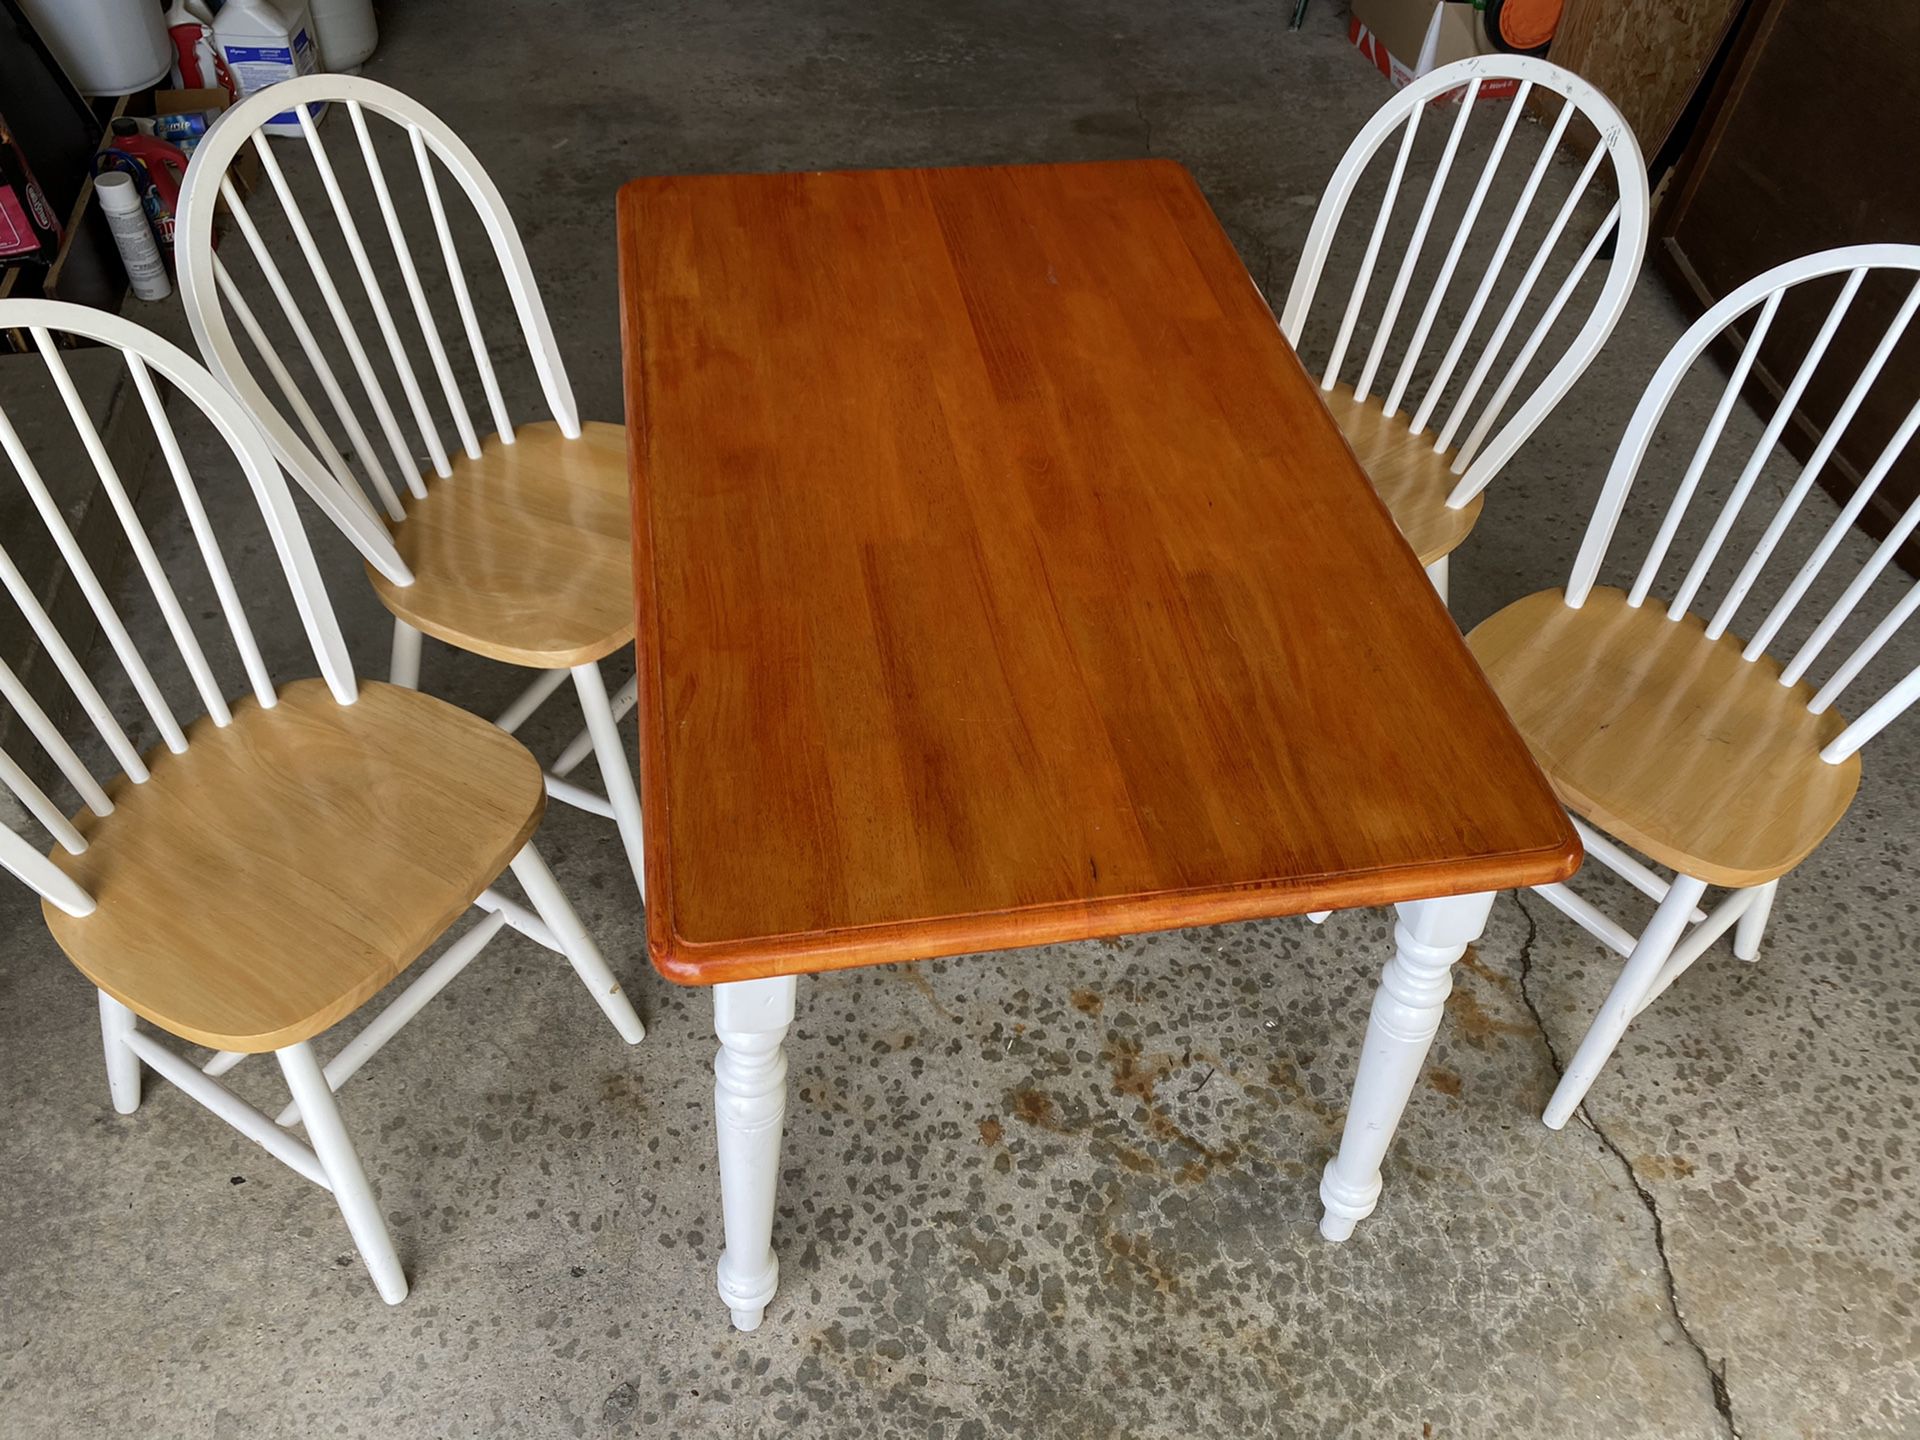 Dining table and chairs set - PICK UP TODAY ONLY FOR $60